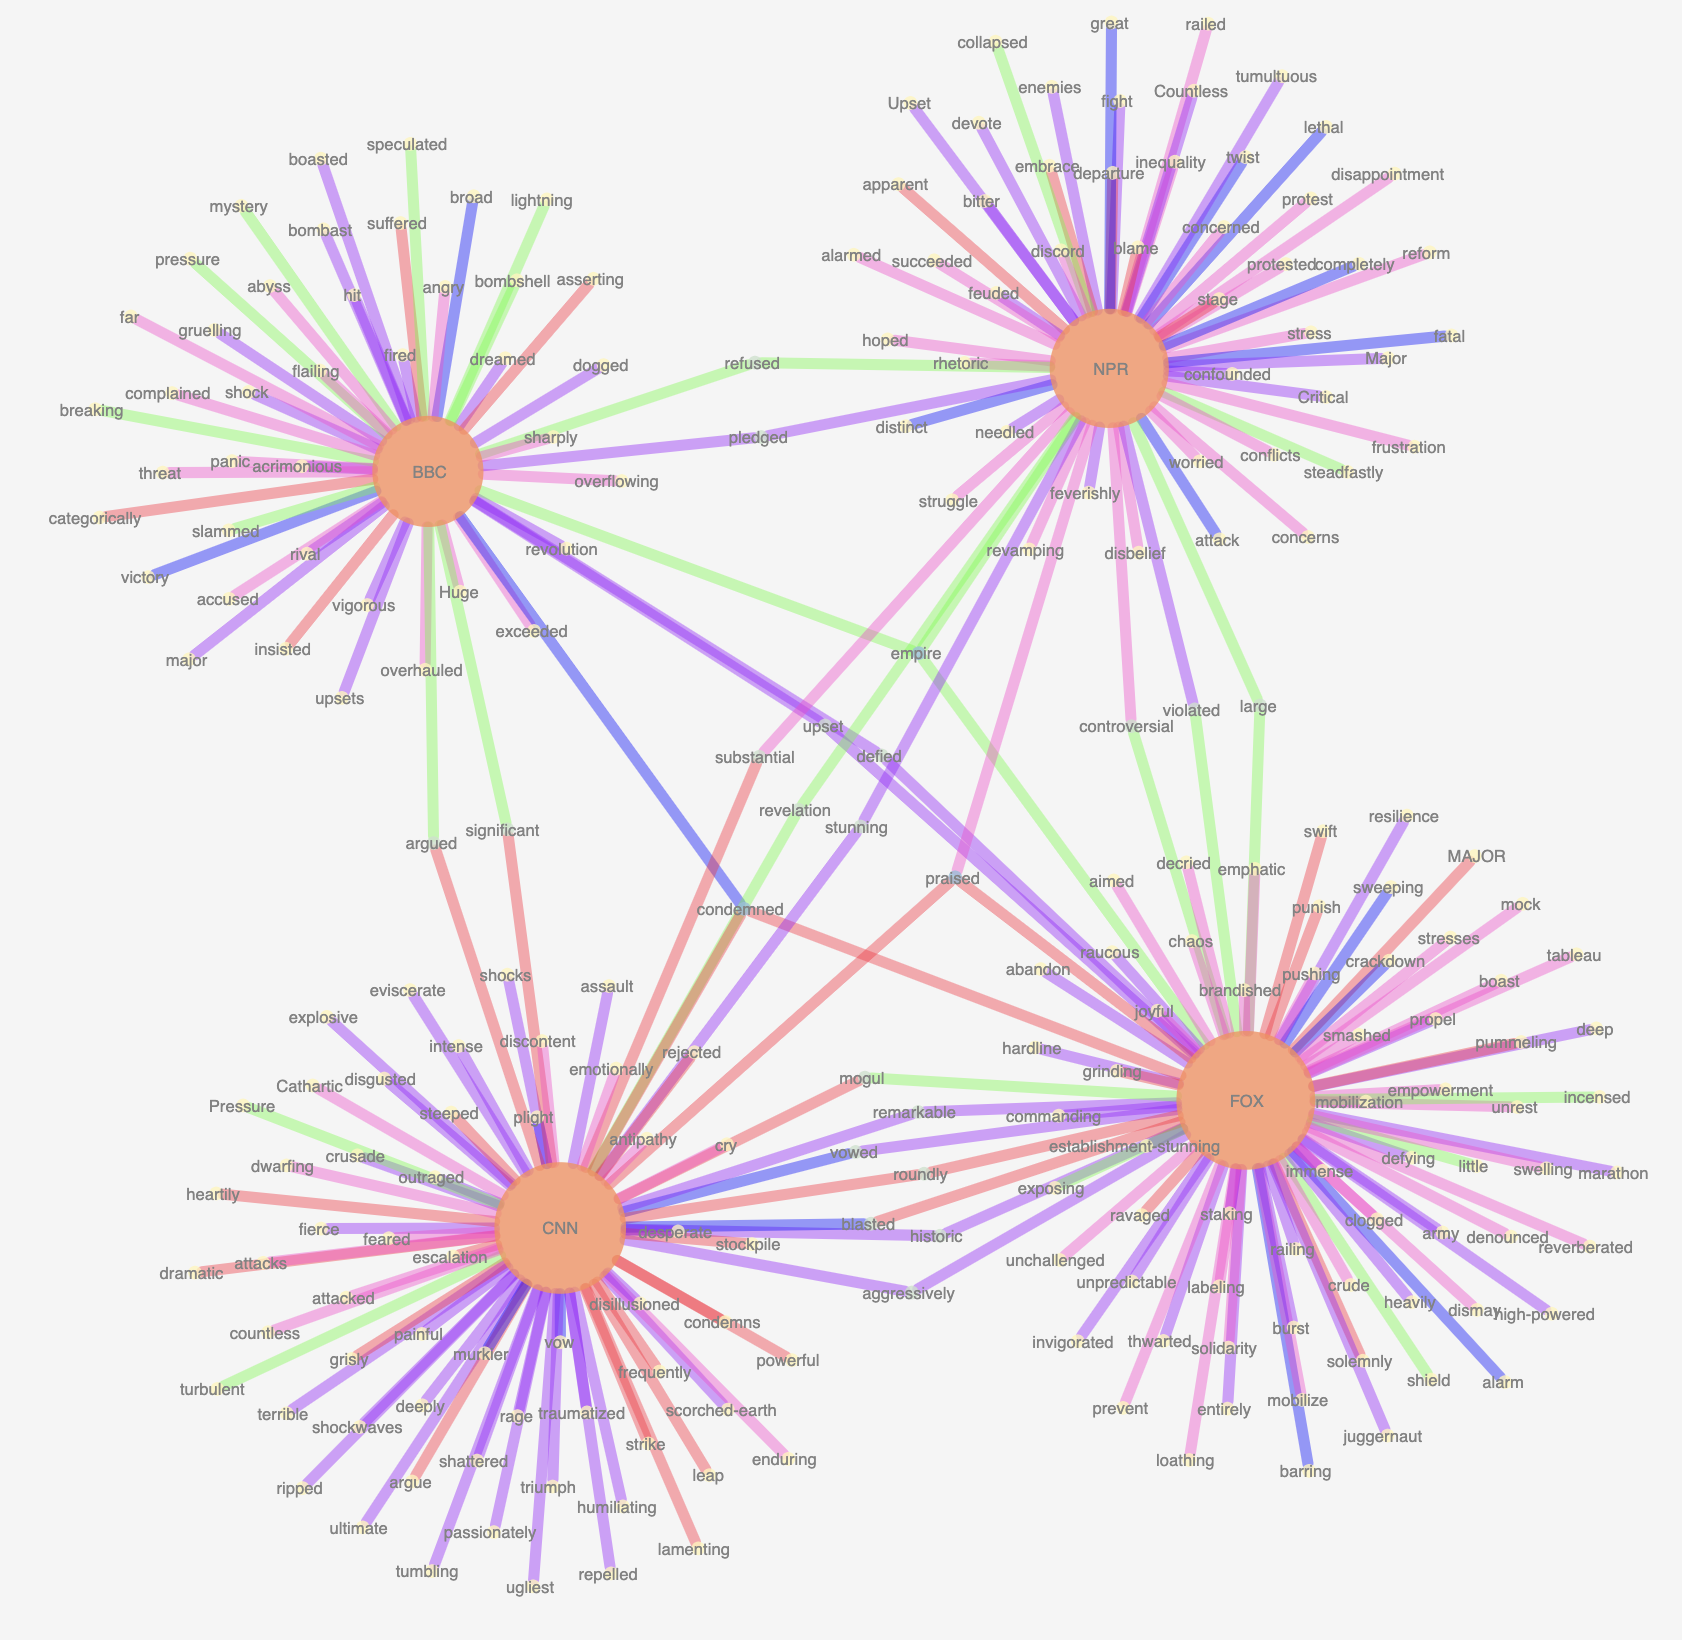 network analysis from newtfire newsAnalysis project